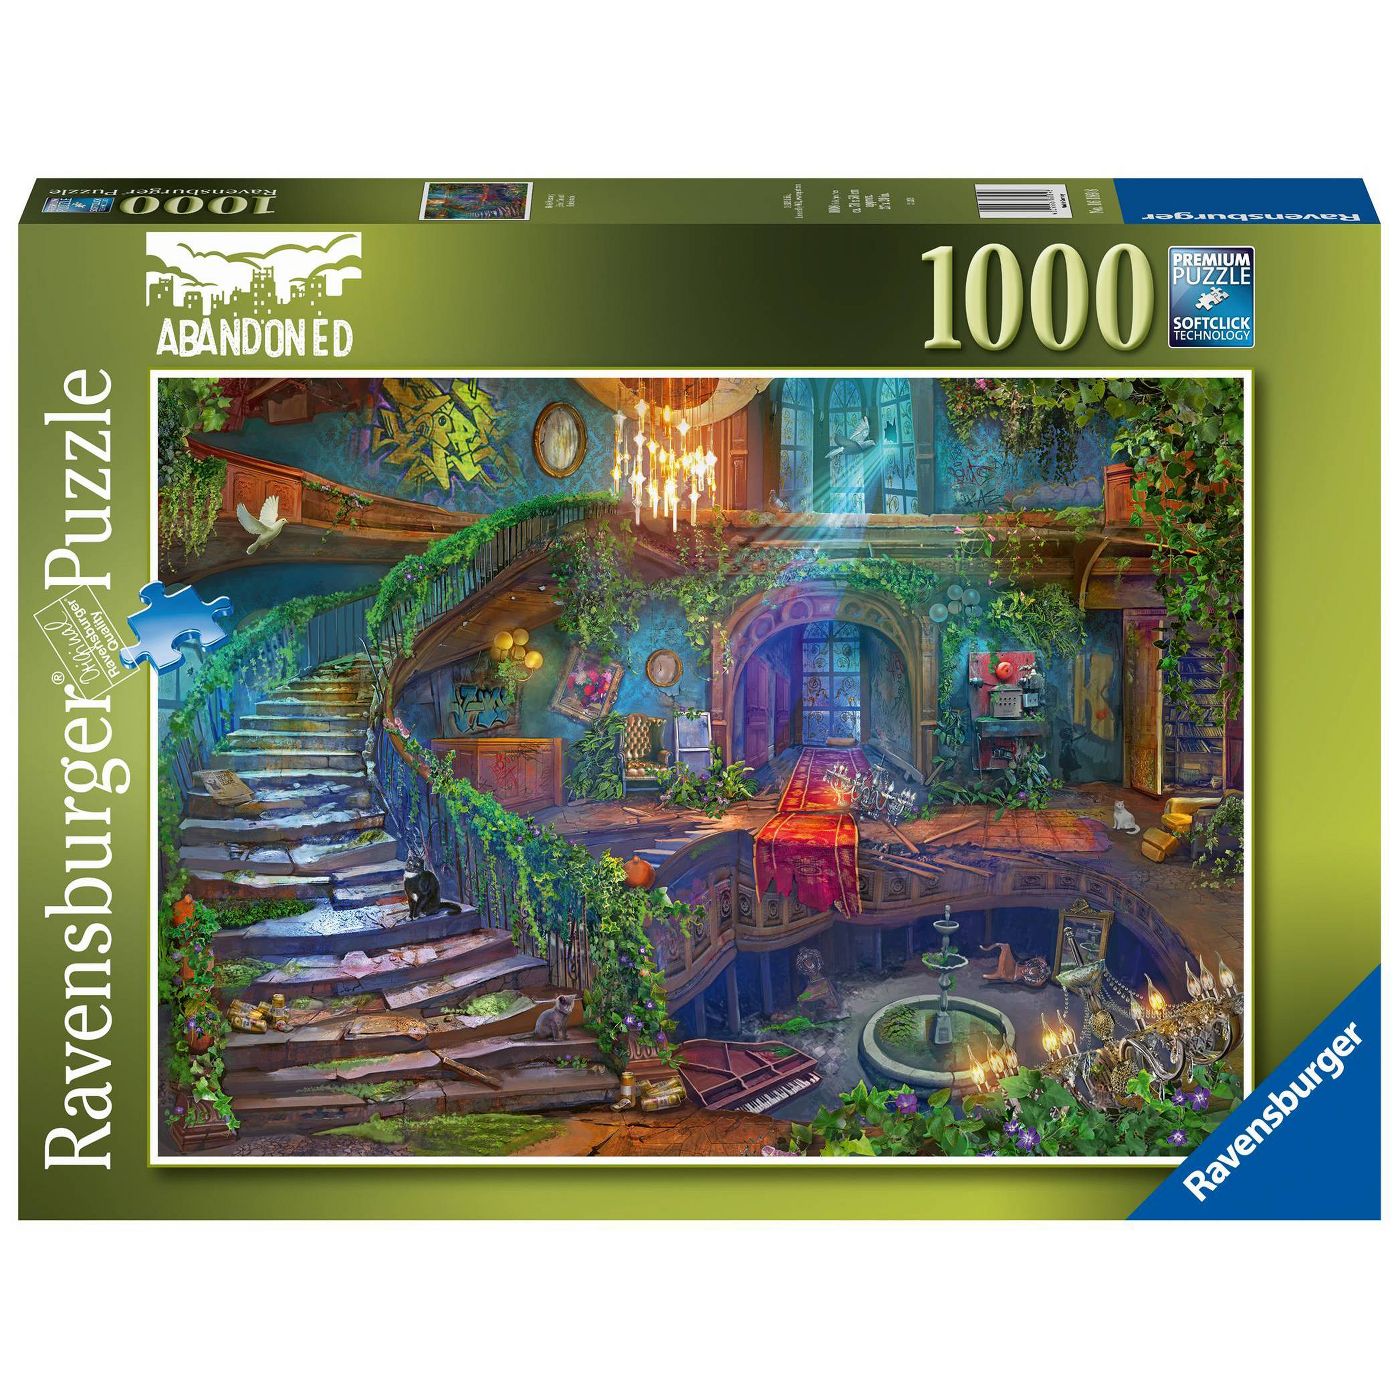 https://thepuzzlecollections.com/wp-content/uploads/2021/03/ravensburger-abandoned-hotel.jpg